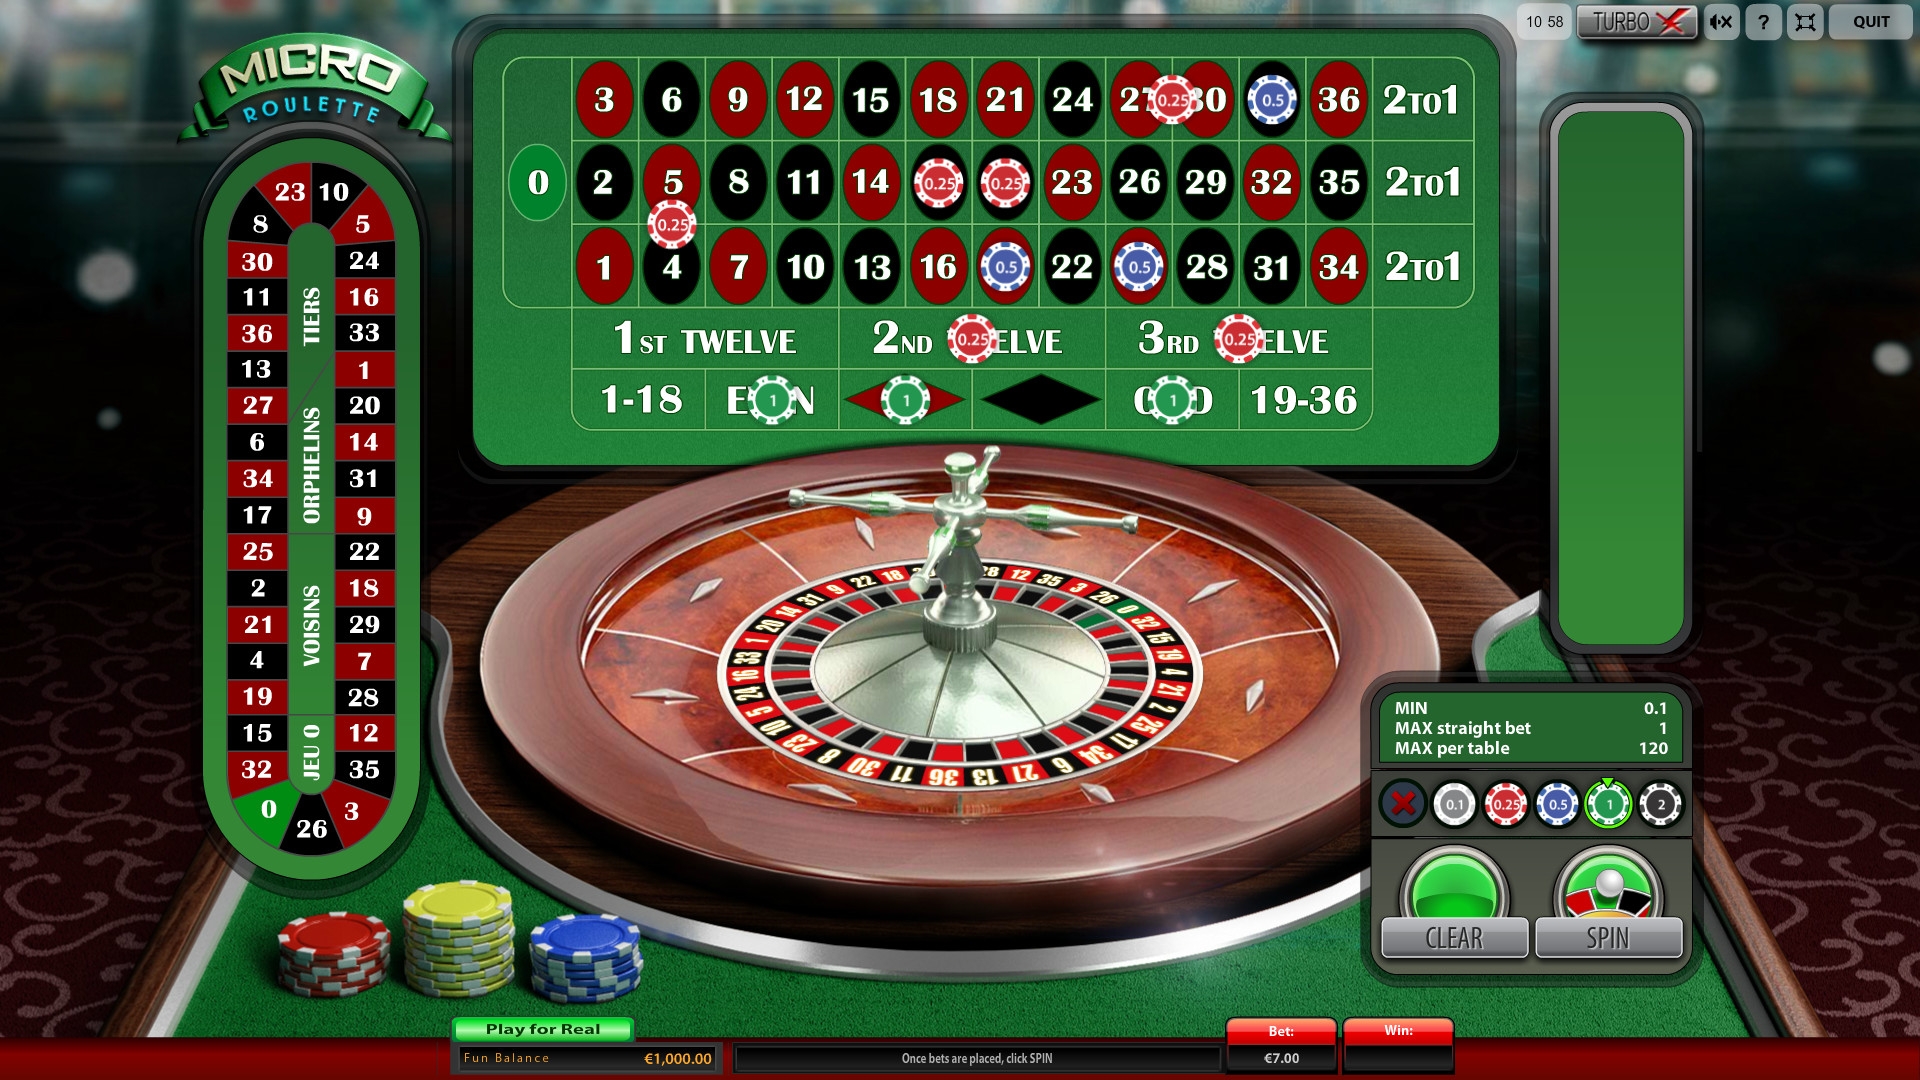 Micro Roulette (Micro Roulette) from category Roulette